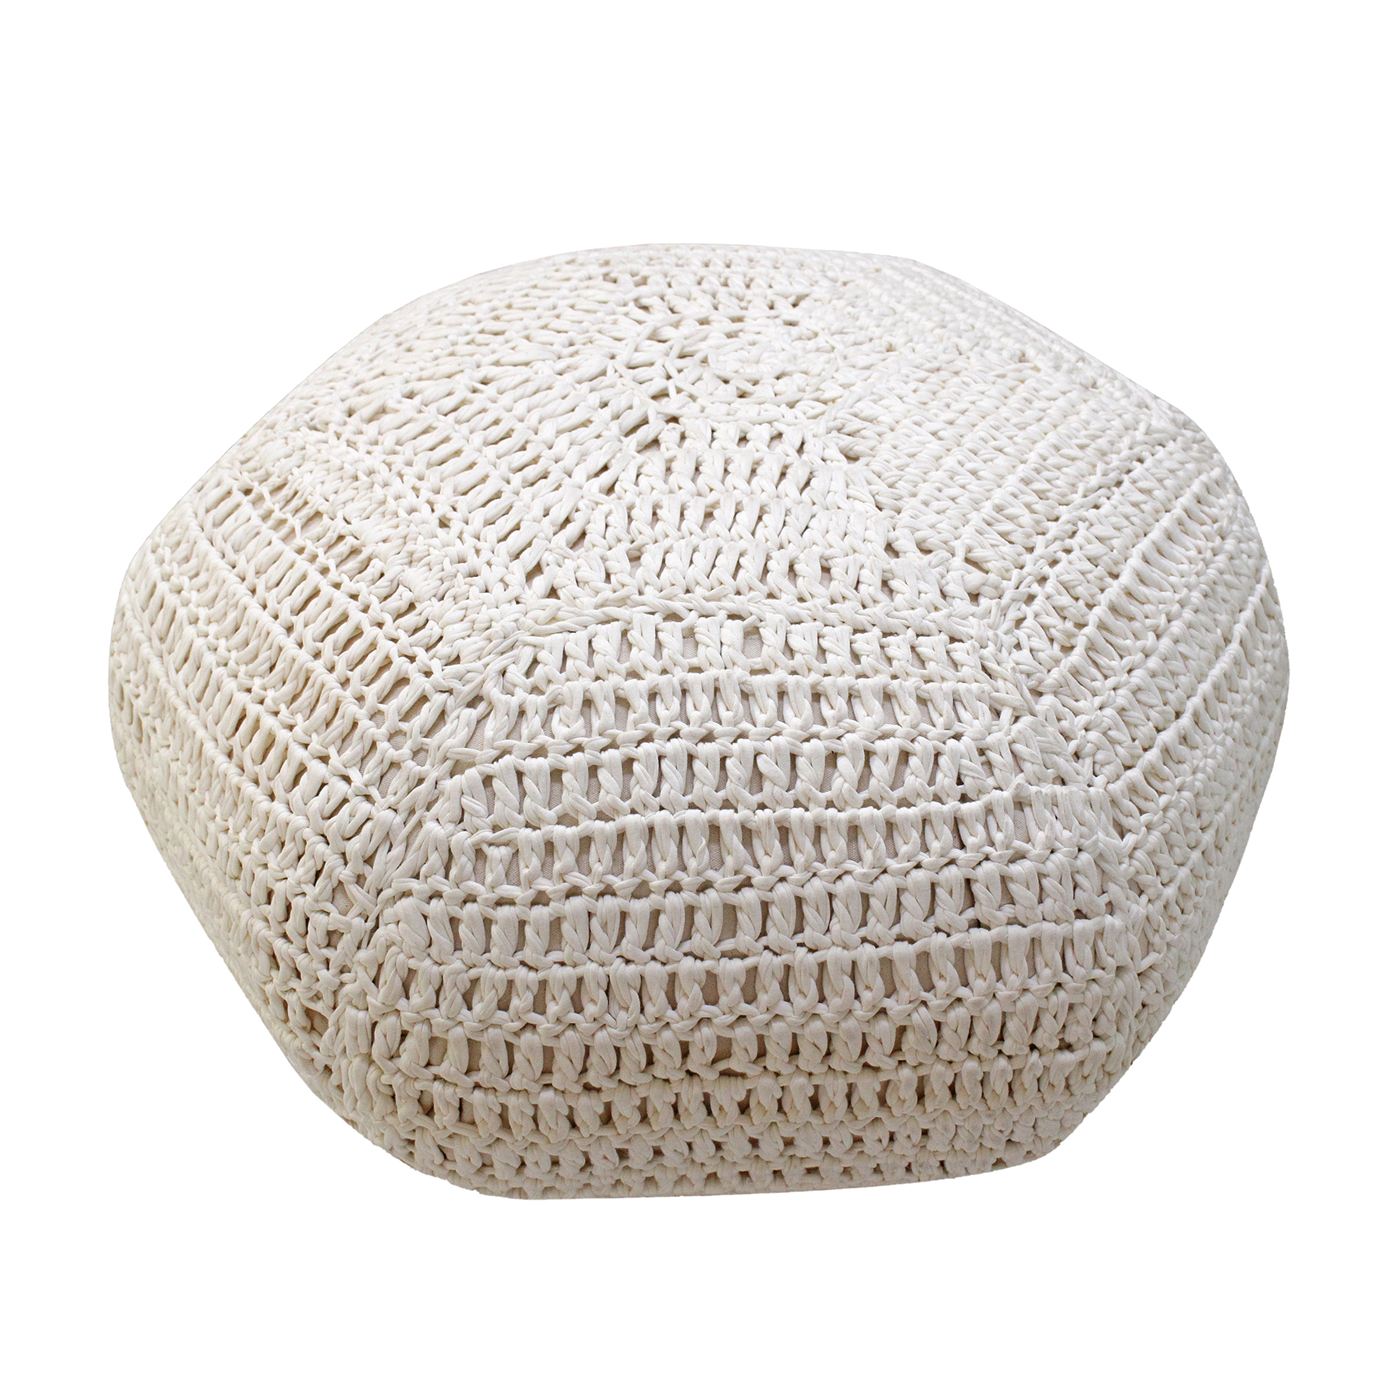 Nybro Pouf, Cotton Rag, Natural White, Hm Knitted, Flat Weave 